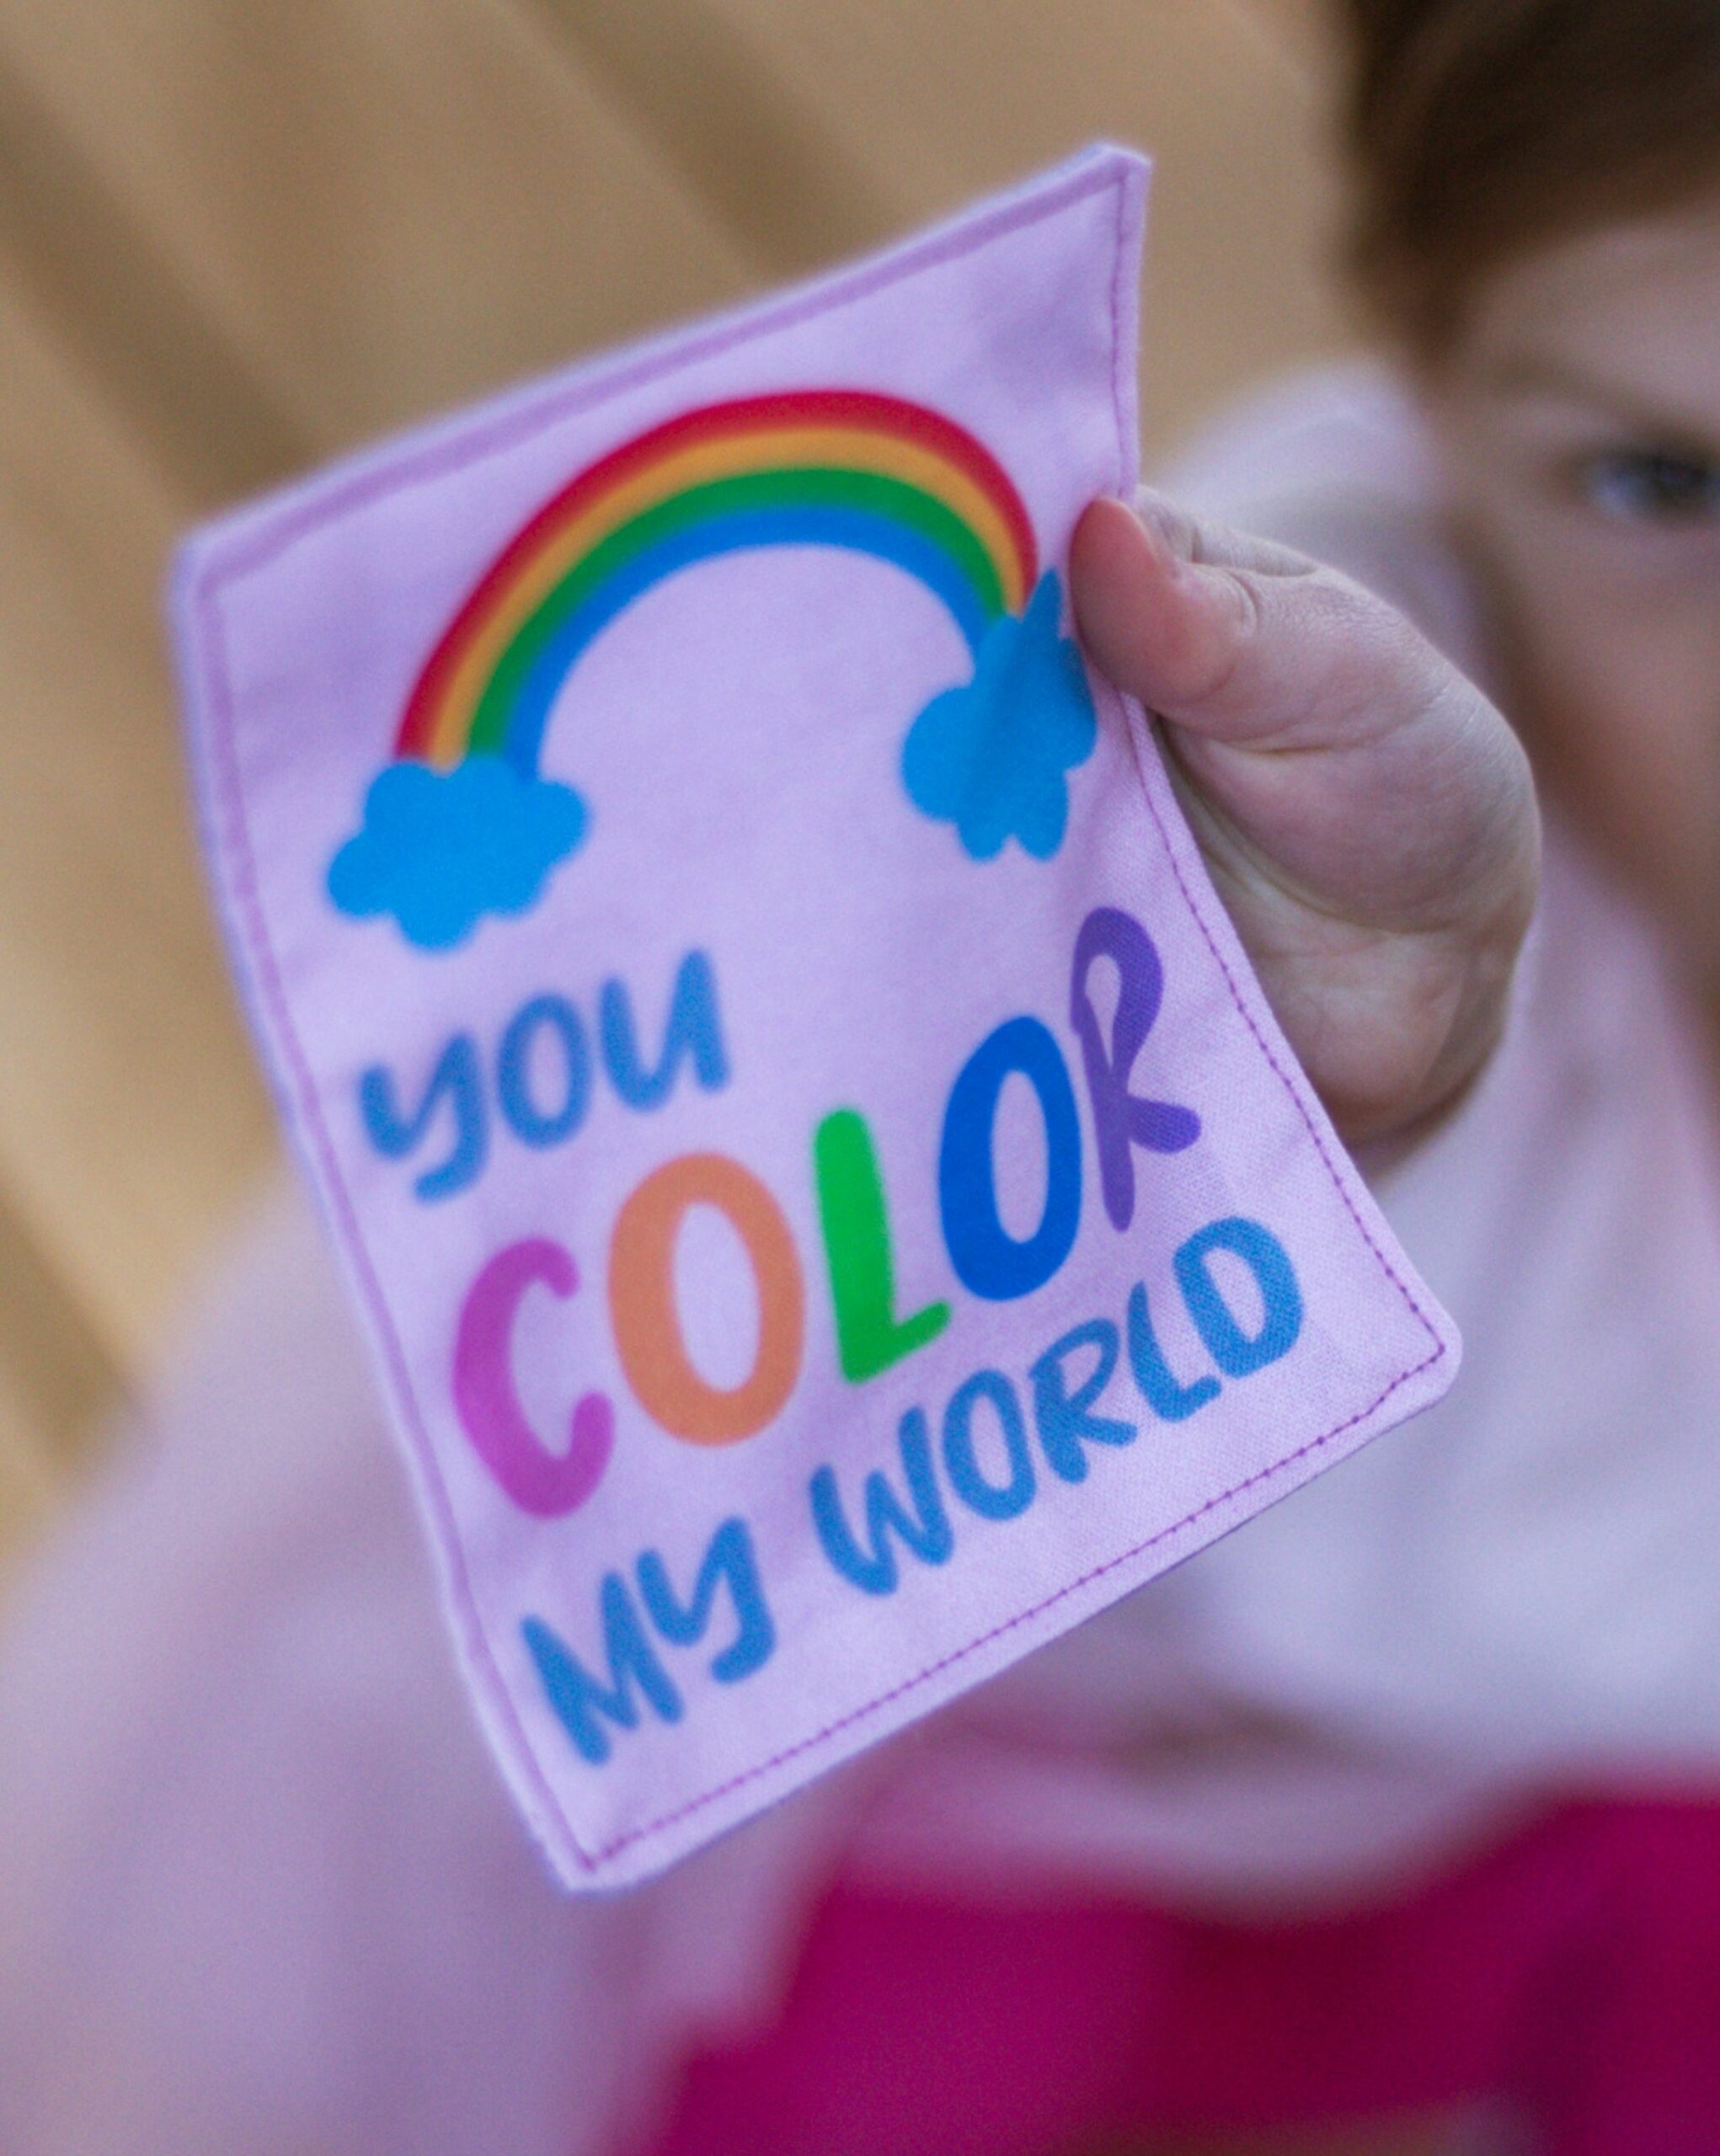 the "You color my world" love note held up close by a toddler